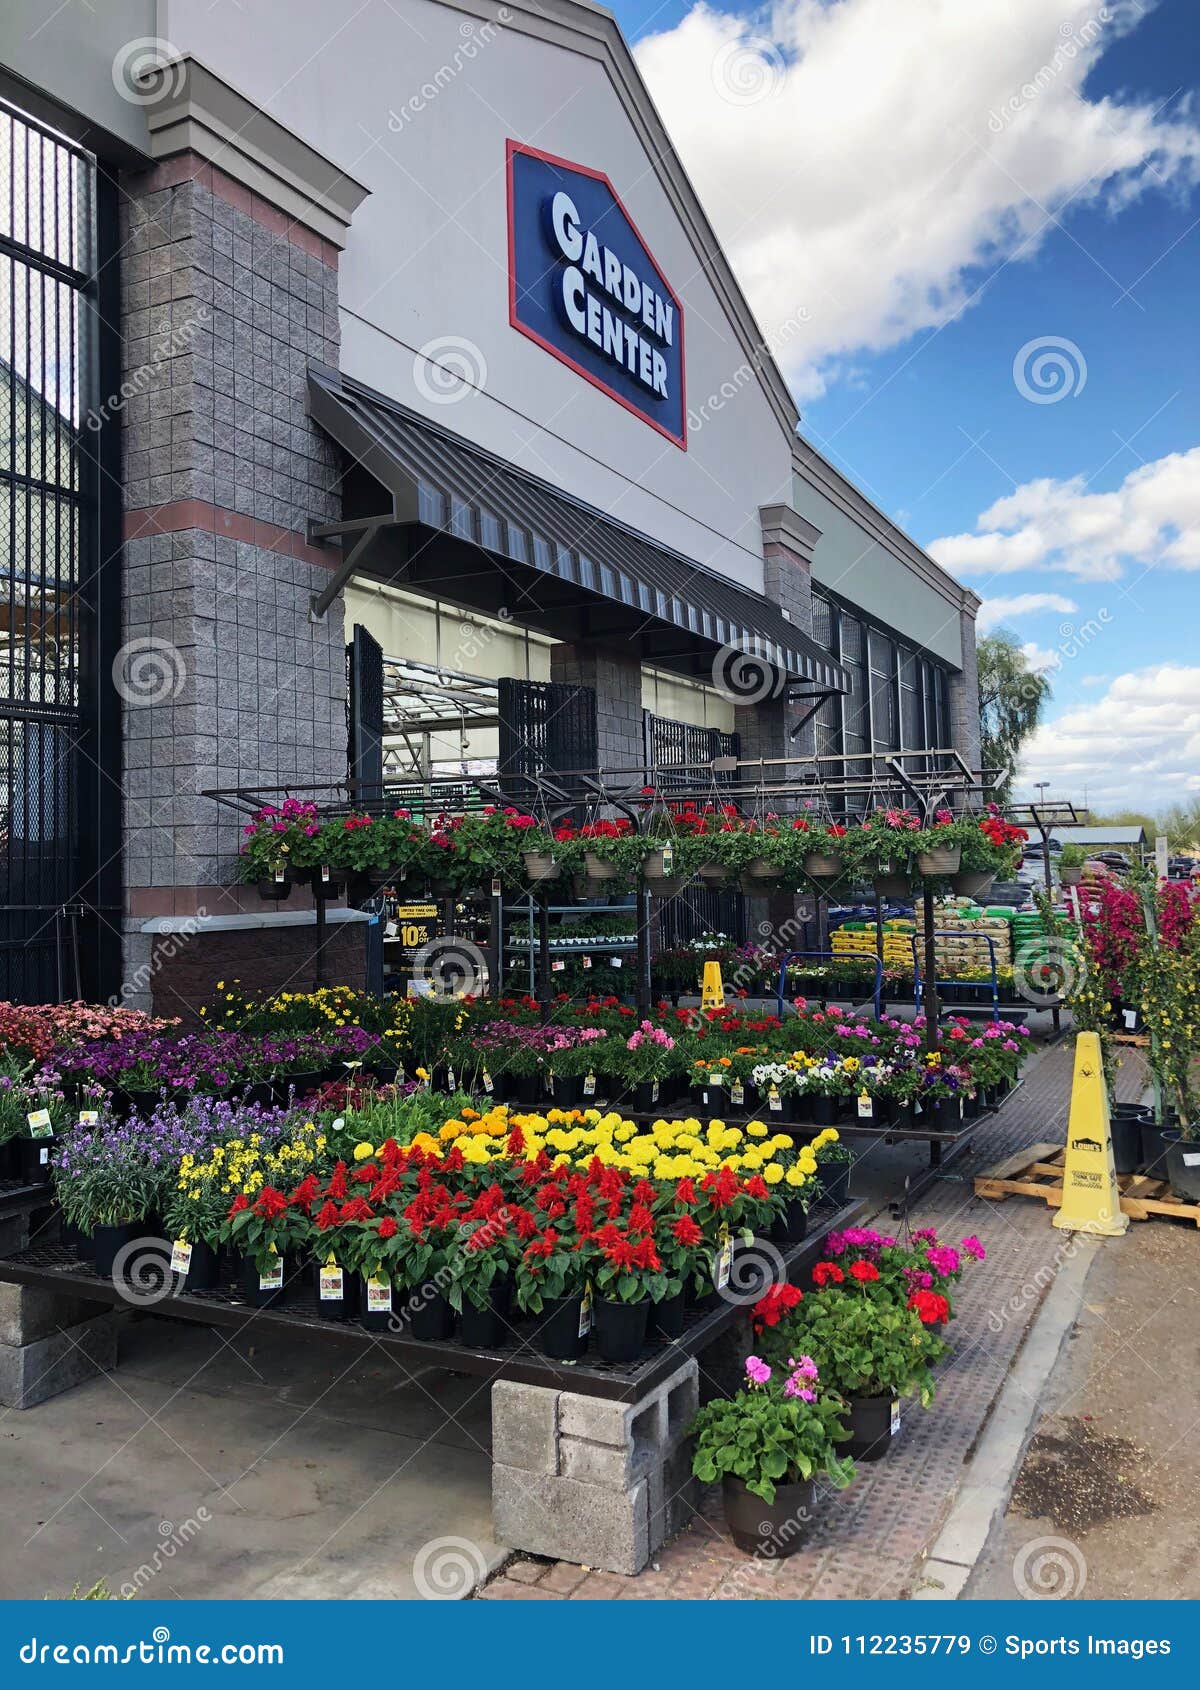 Flowers For Sale At Lowes Garden Center Editorial Stock Image